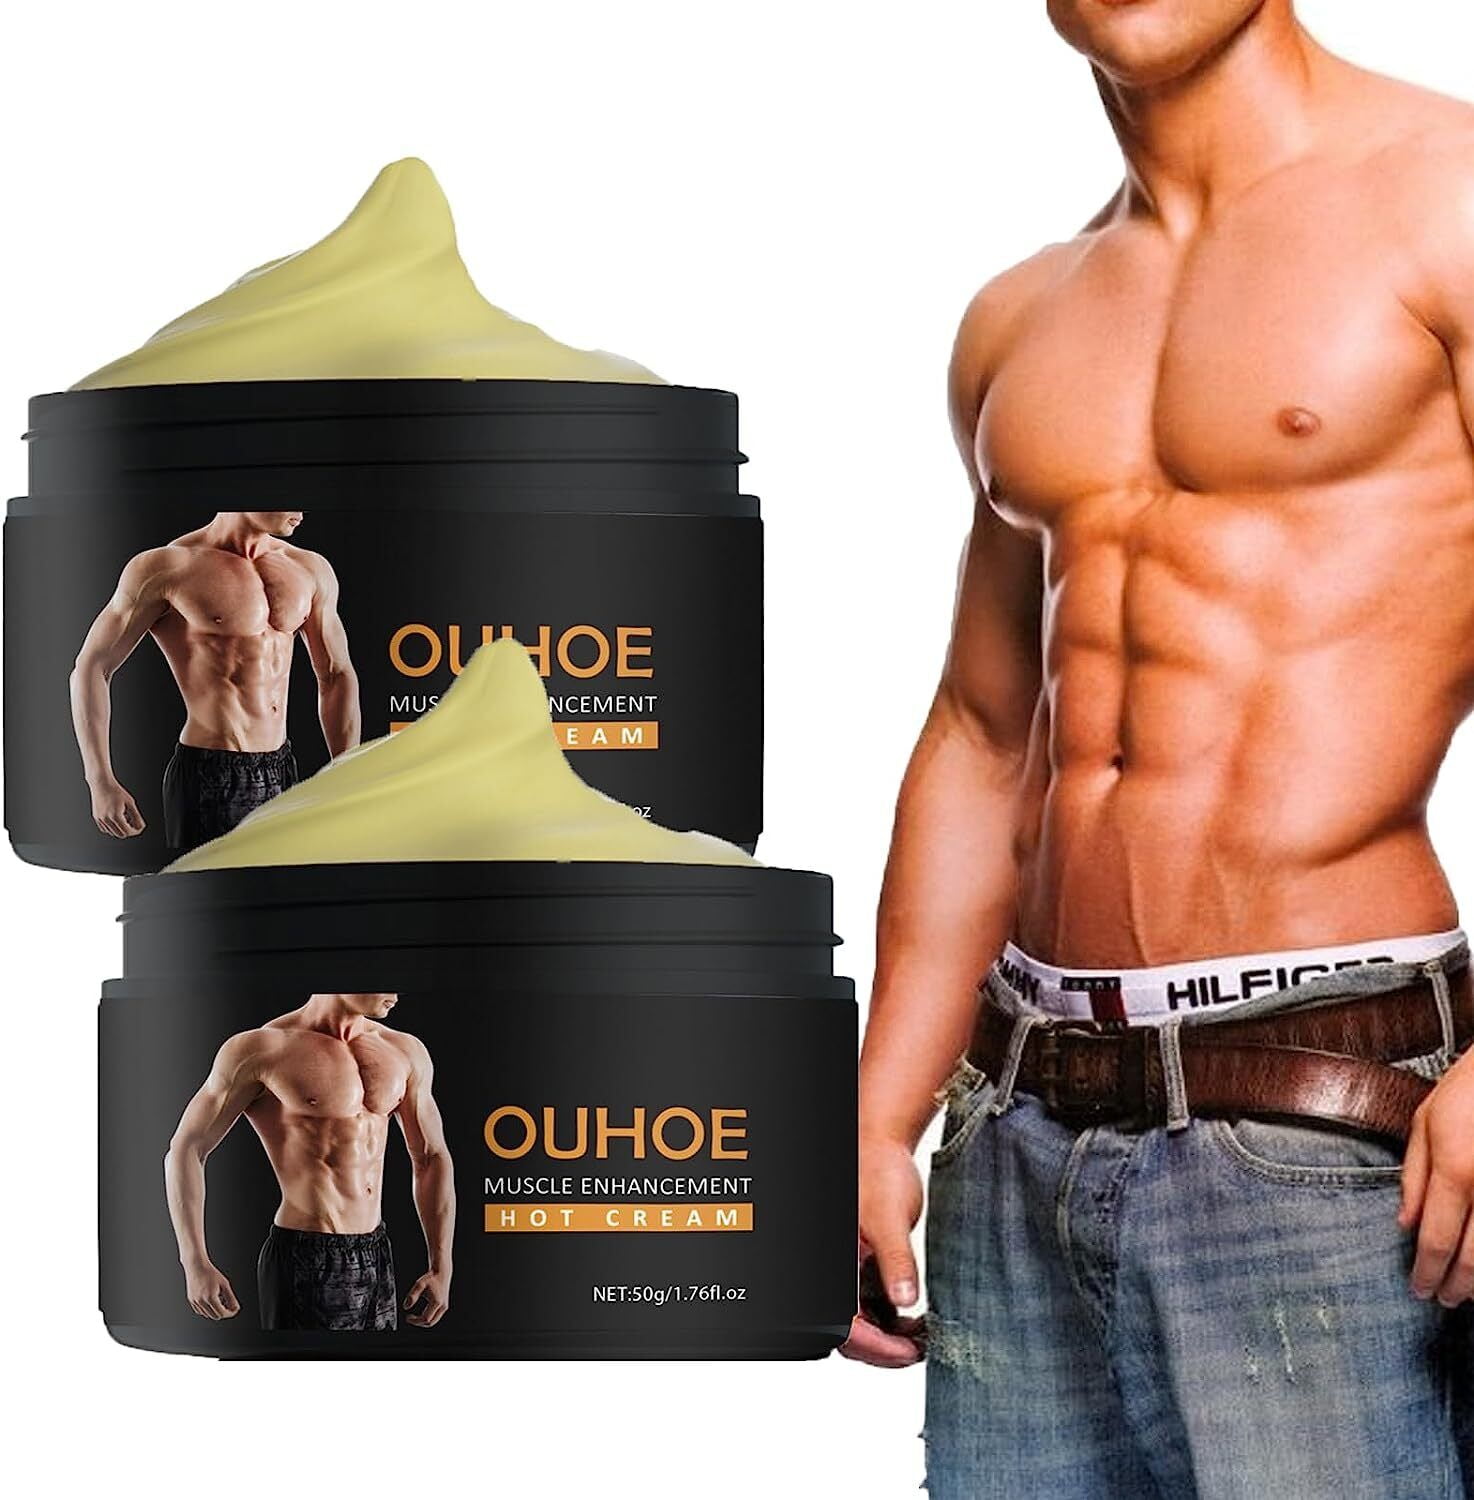 60g Men's Abdominal Muscle Cream Exercise For Abdominal Contraction Cream  Enhancement Muscle Line Abdominal And Muscle Of C5G9